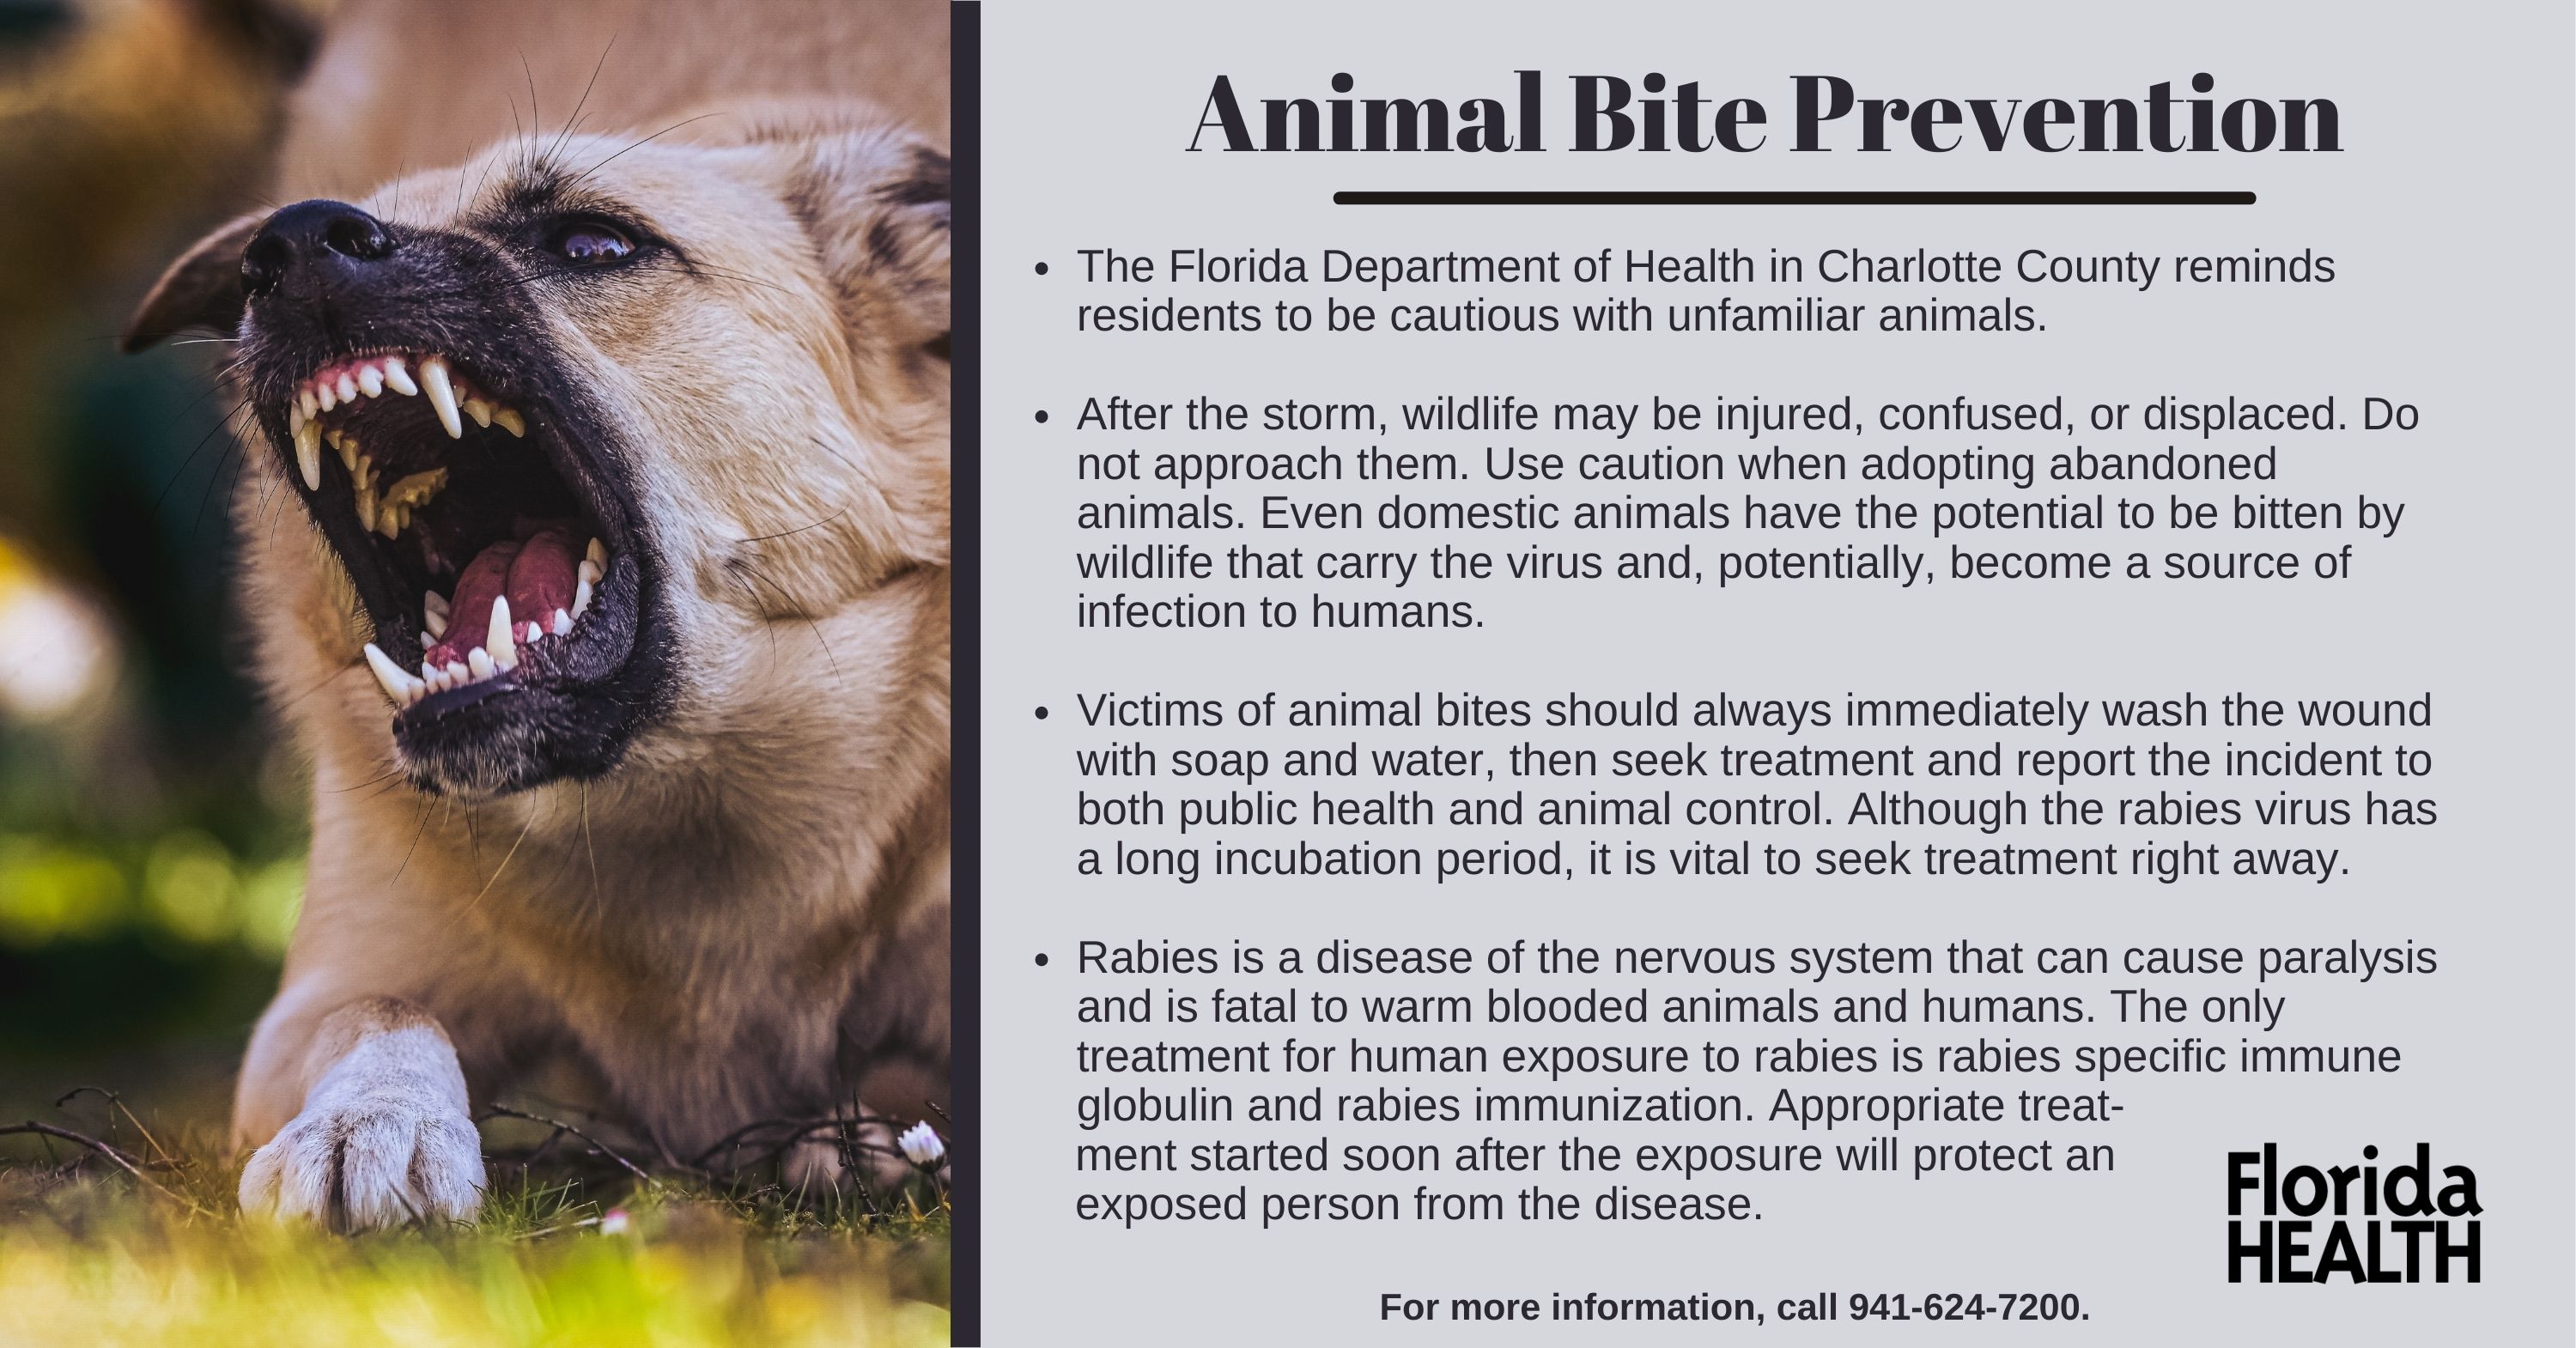 Charlotte County warns of unfamiliar animals, bites following natural  disaster